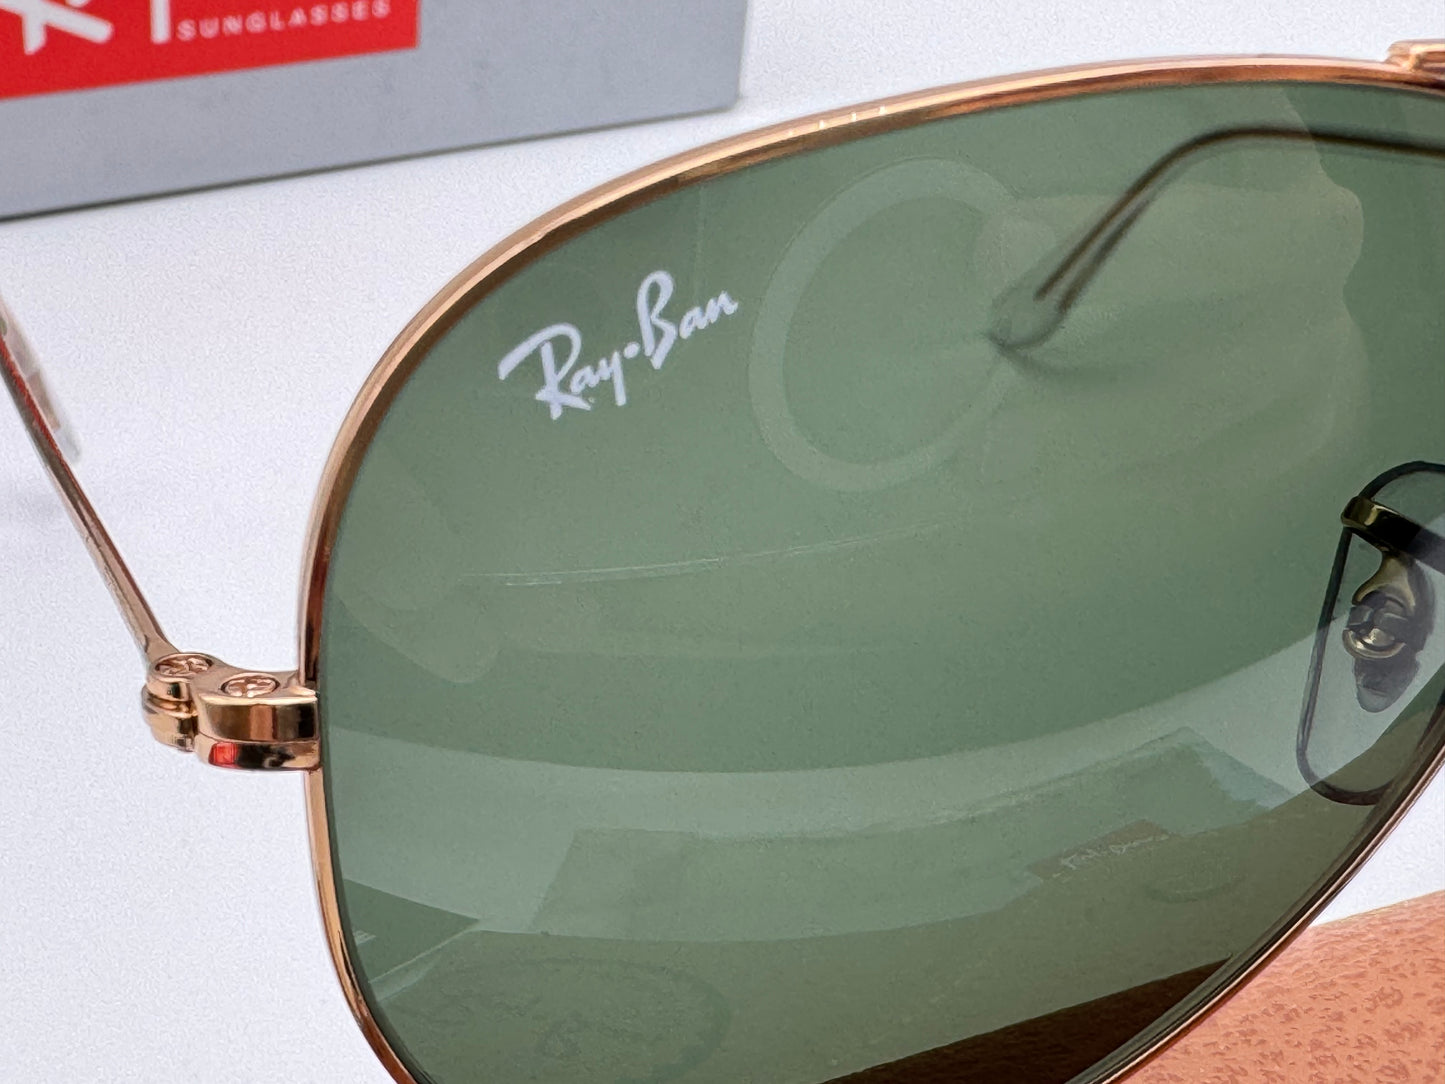 Ray-Ban Aviator 58mm RB 3025 Rose Gold / G-15 920231 Italy NEW